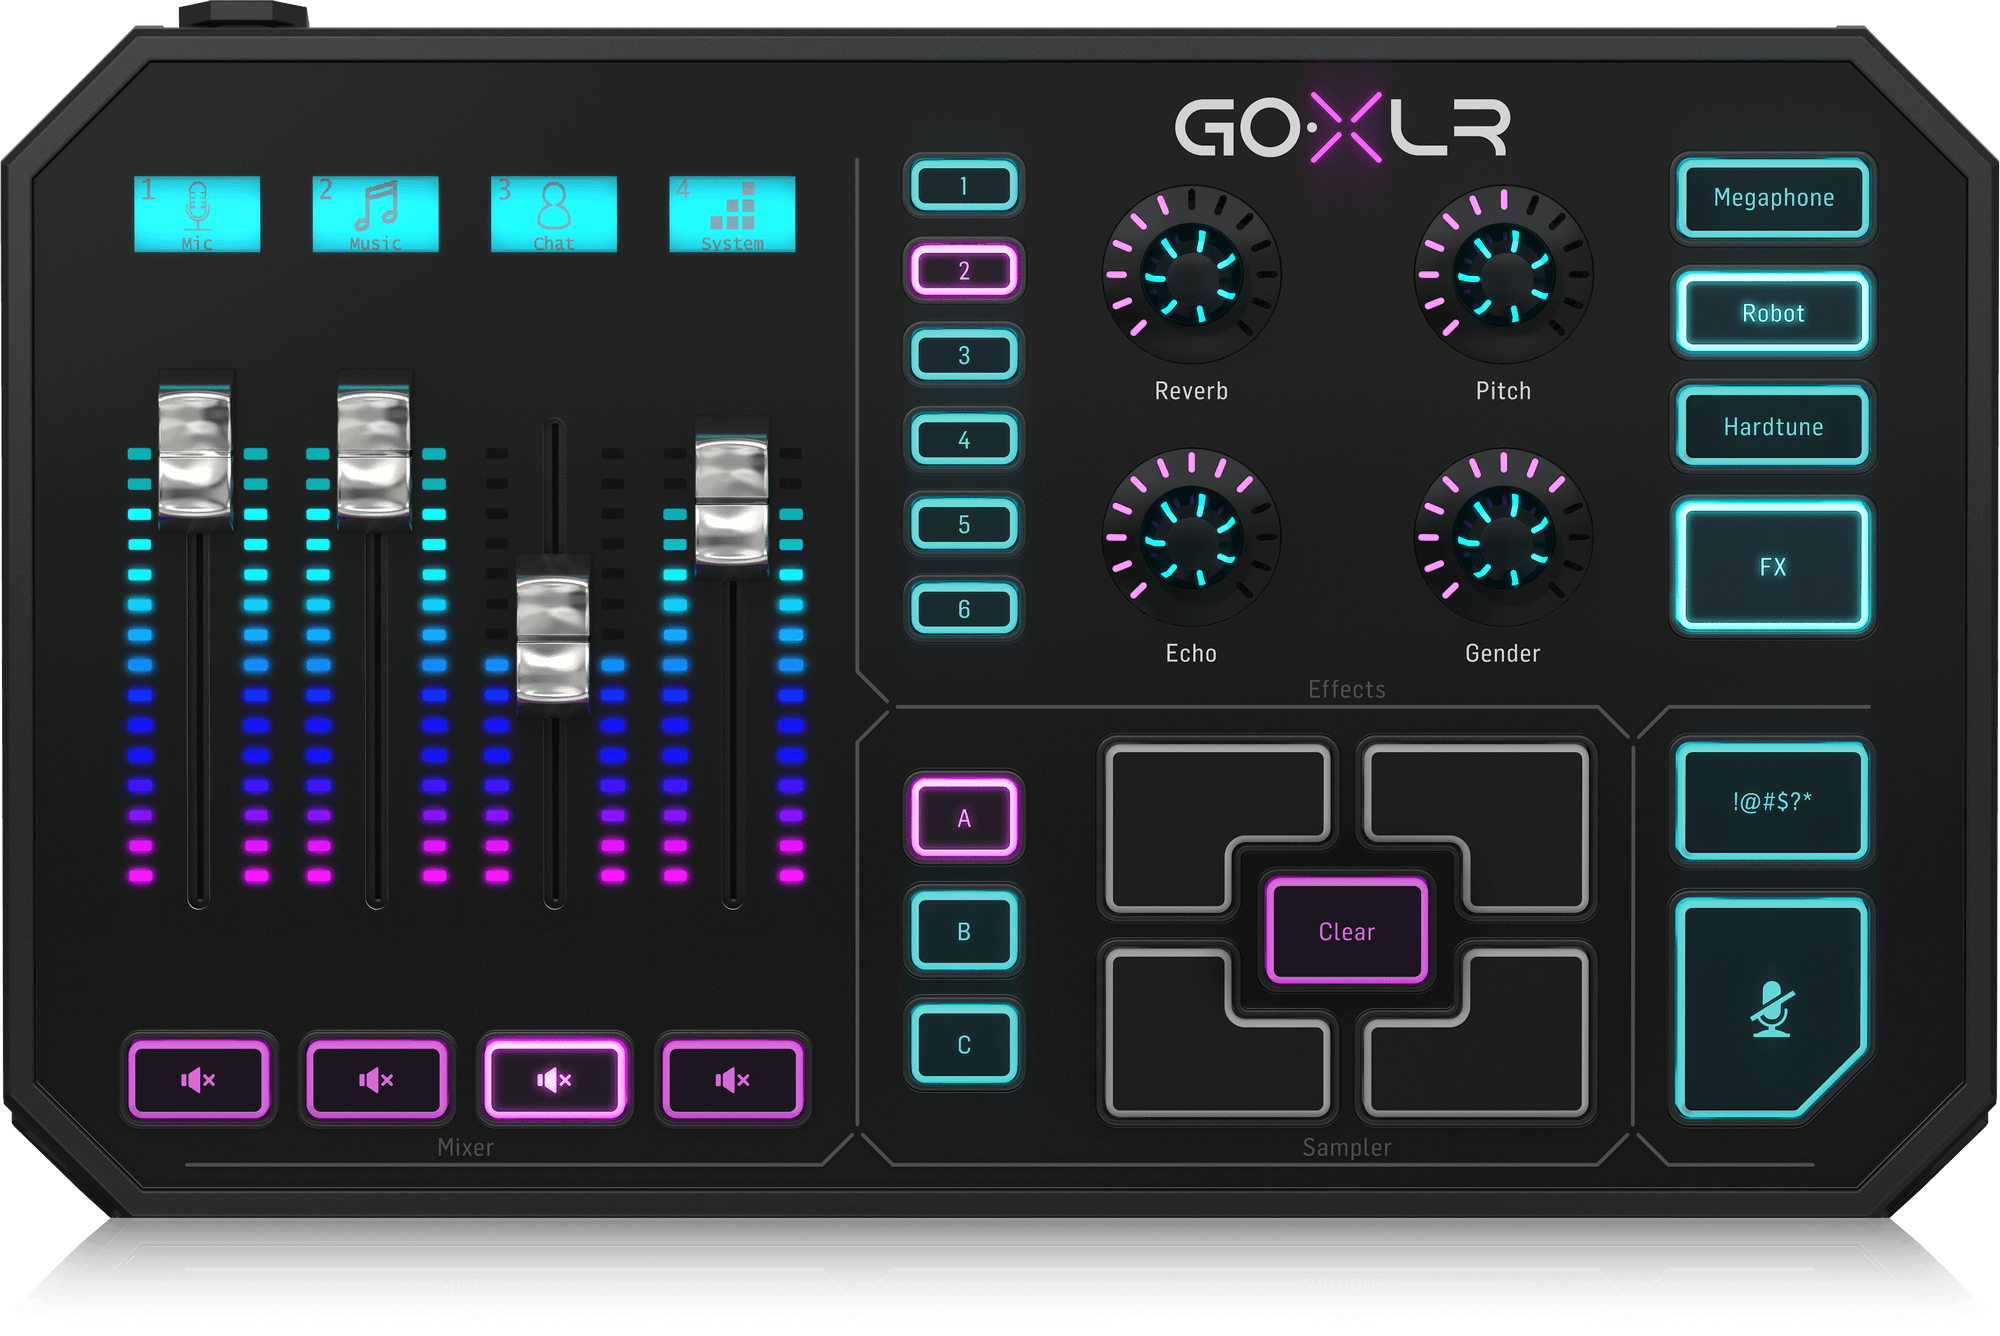 TommyInnit uses OBS with a GoXLR mixer as a screen recorder for YouTube videos.